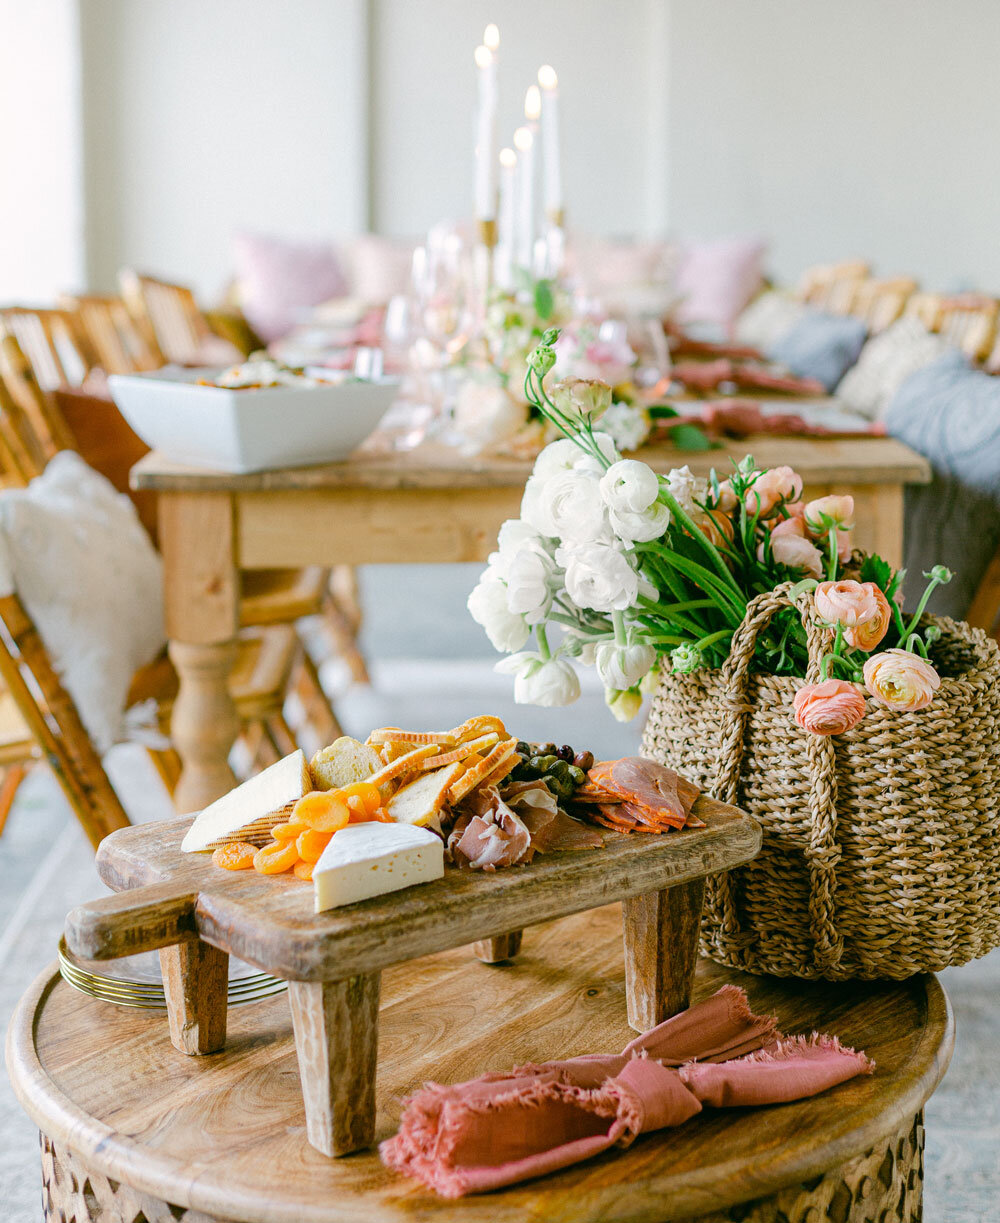 Wedding table featuring an artisanal cheese board adorned with white and light pink flowers, showcasing Joel Catering's expertise in rustic-themed events in New Orleans